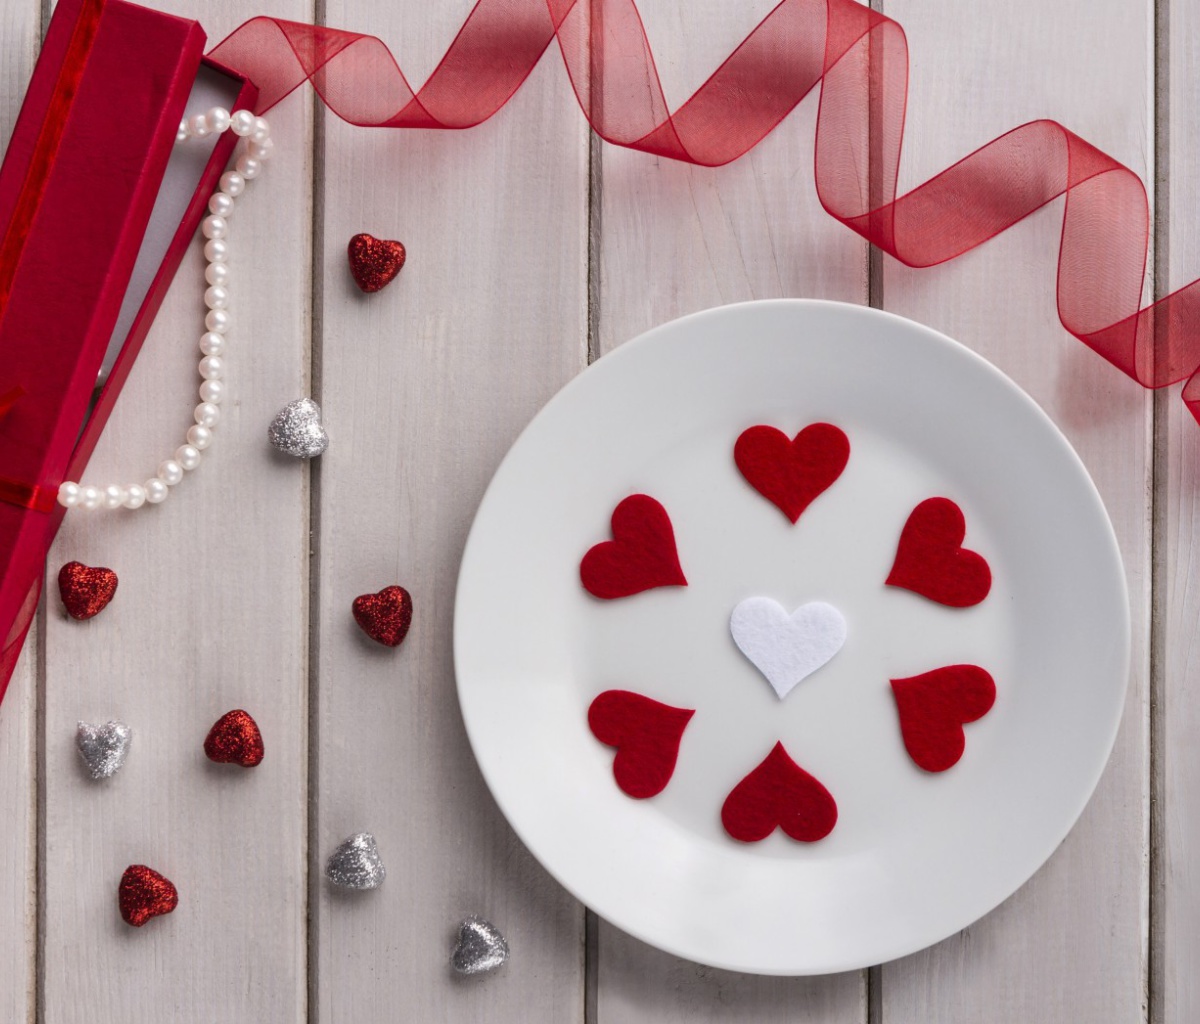 Romantic Valentines Day Table Settings wallpaper 1200x1024